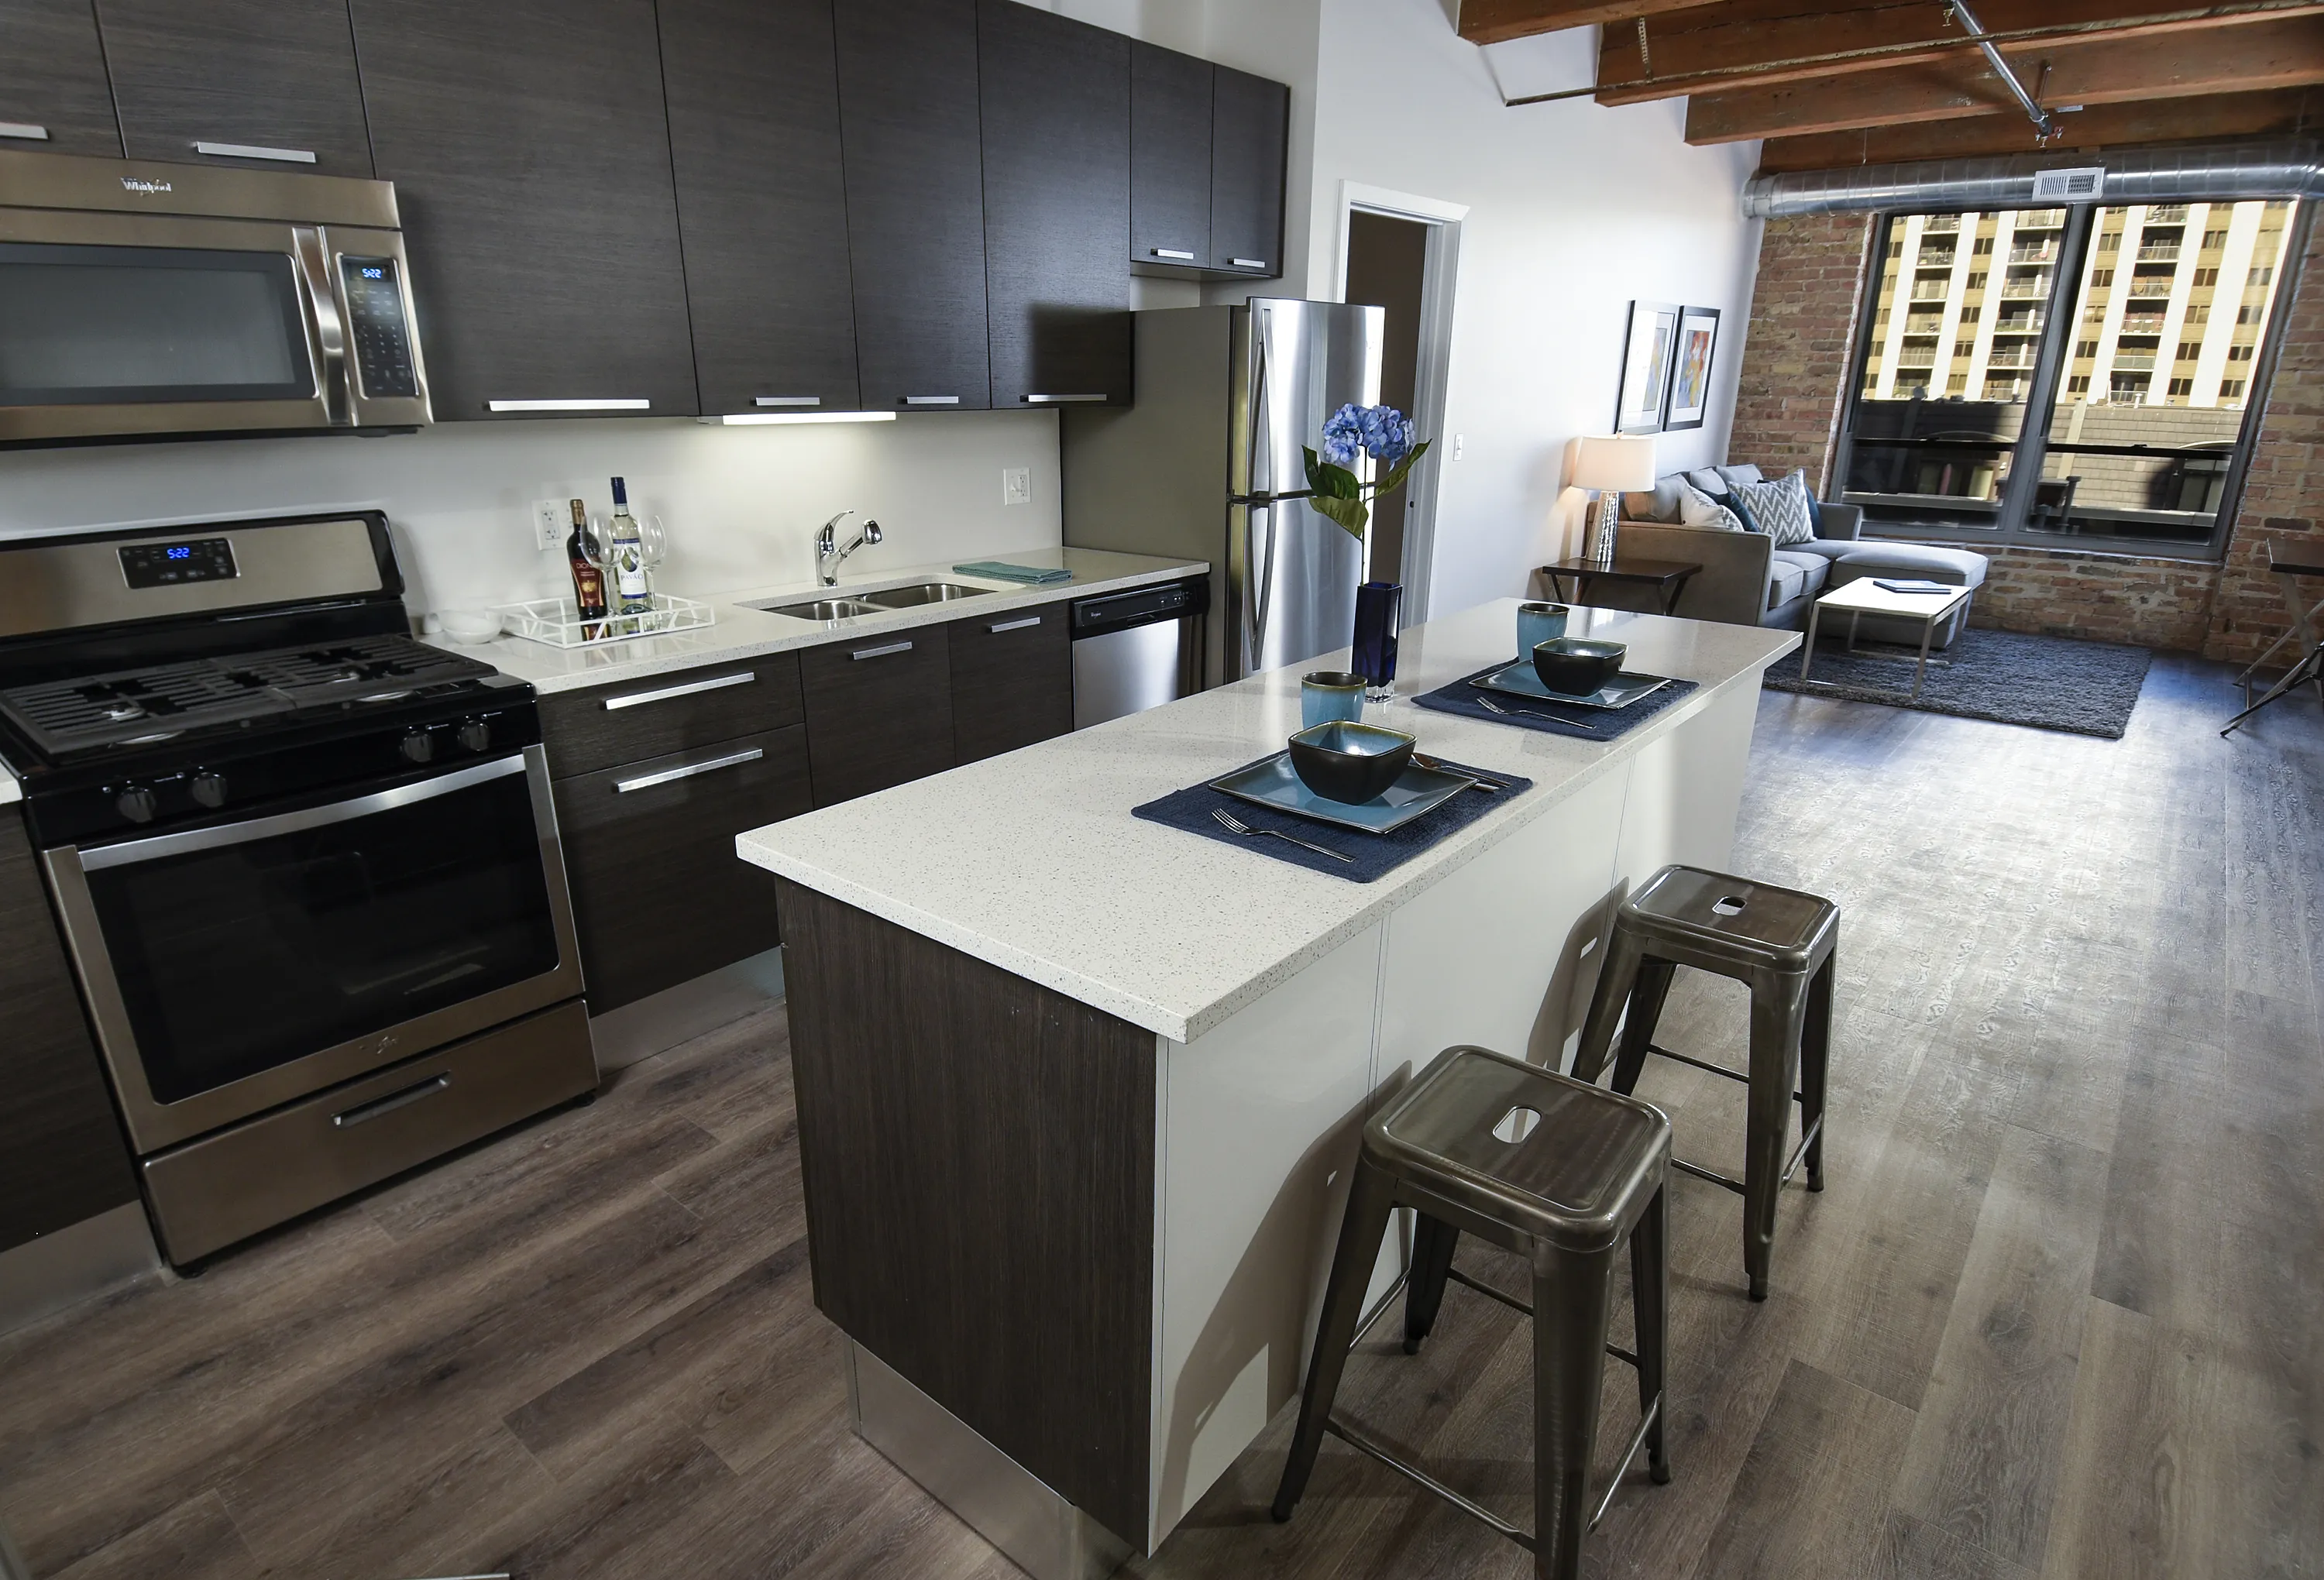 model kitchen and island at the Fairfax Lofts in the South Loop